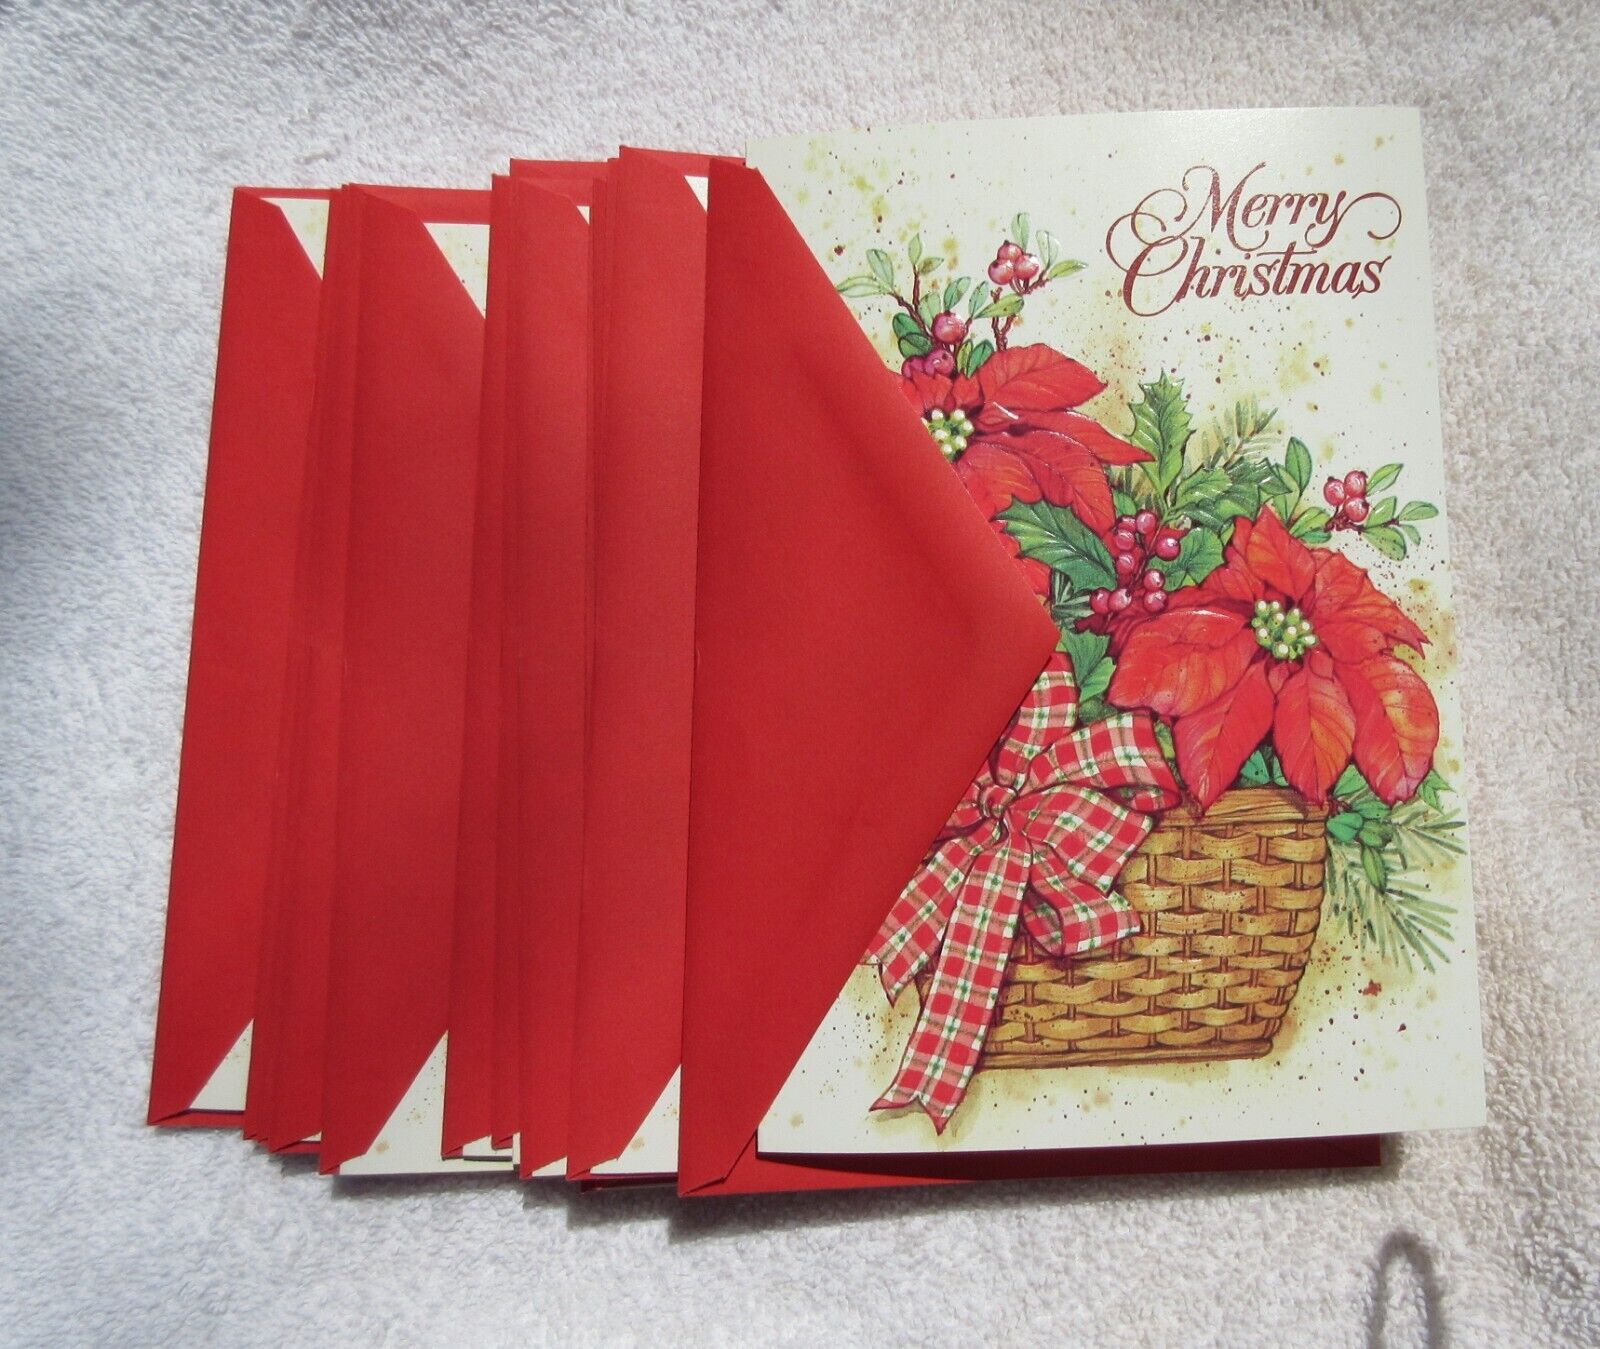 Lot of 13 Vintage Unused Grand Award Christmas Cards w/ Red Envelopes